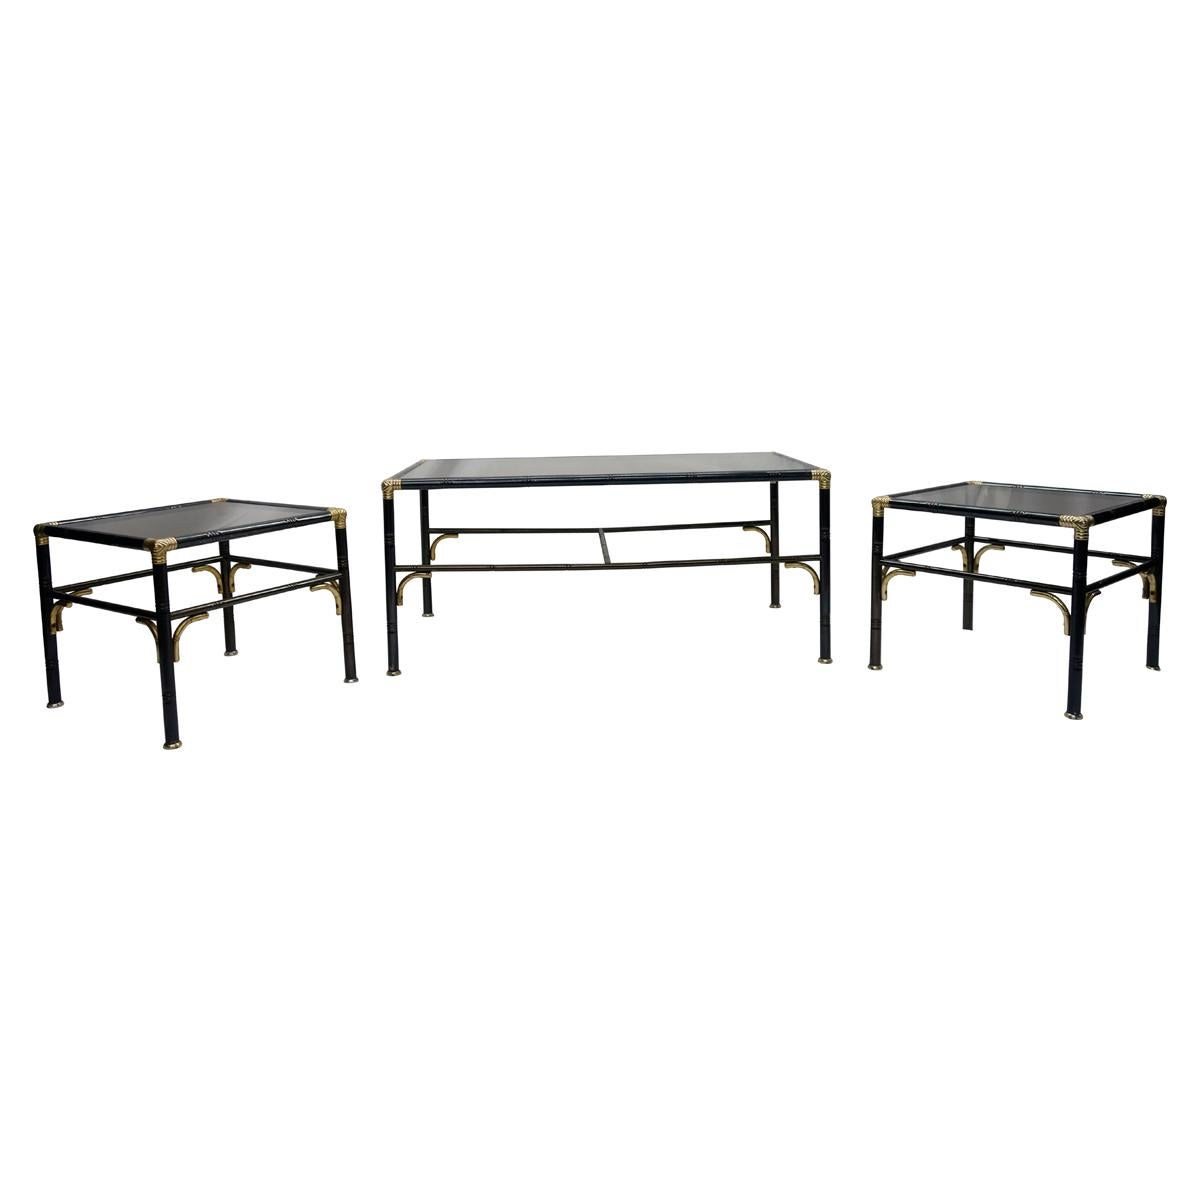 Mid-20th Century Hollywood Regency Steel and Brass Faux Bamboo Coffee Table, Smoked Glass Top For Sale